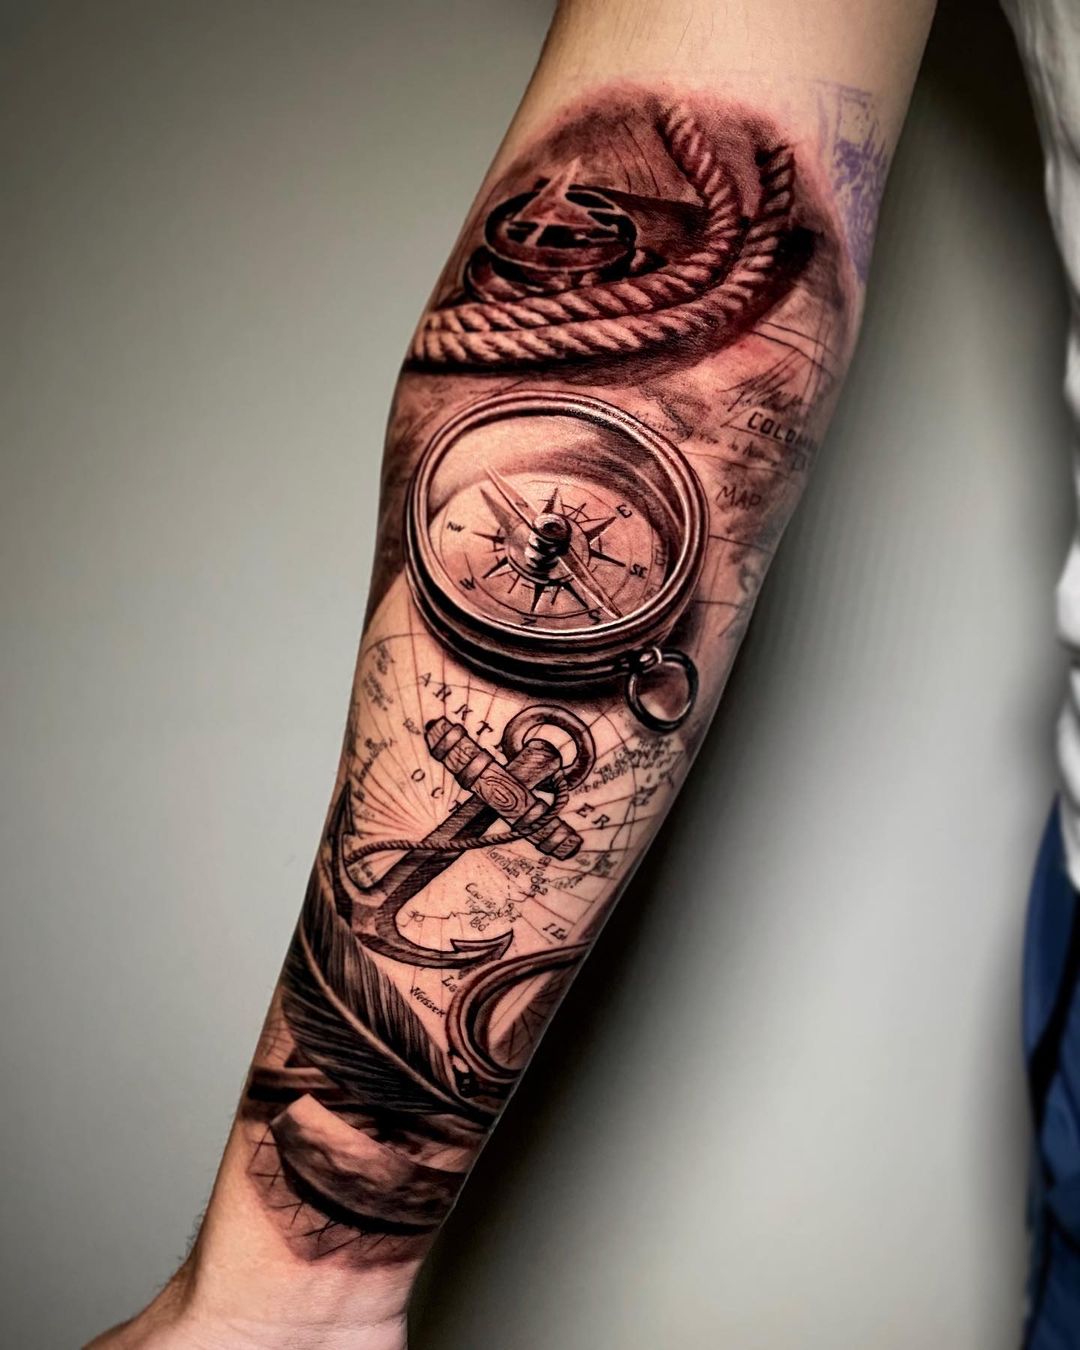 Compass rose with graphical elements tattoo | Tattoo contest | 99designs